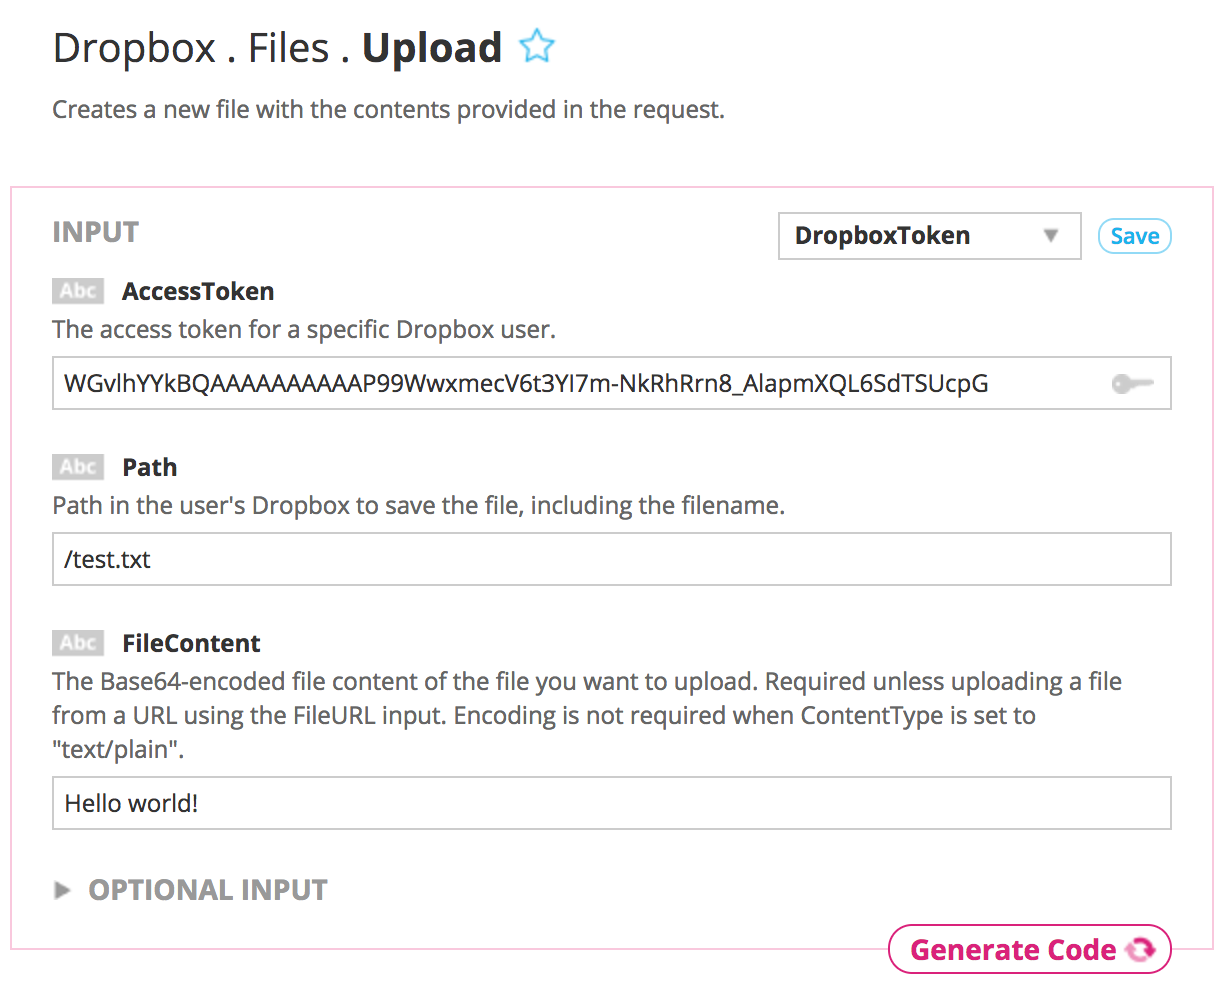 Required inputs to upload a file